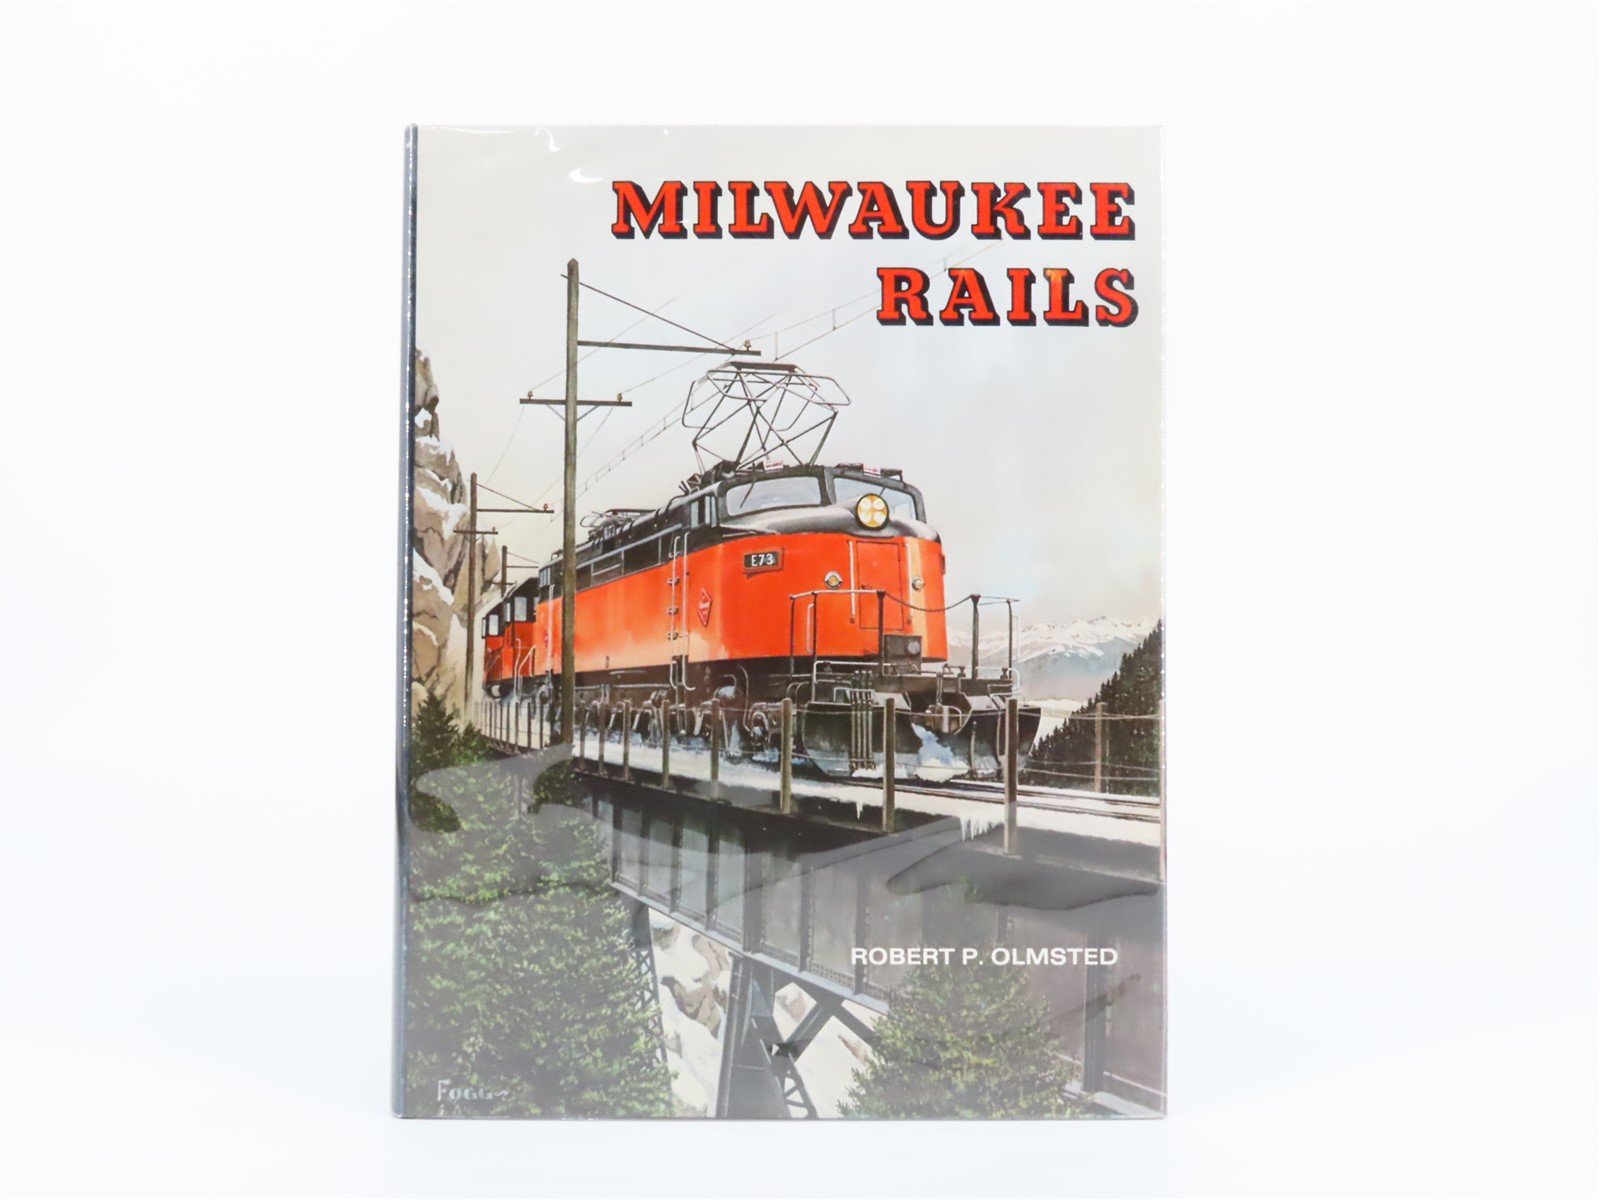 Milwaukee Rails by Robert P. Olmsted ©1980 HC Book